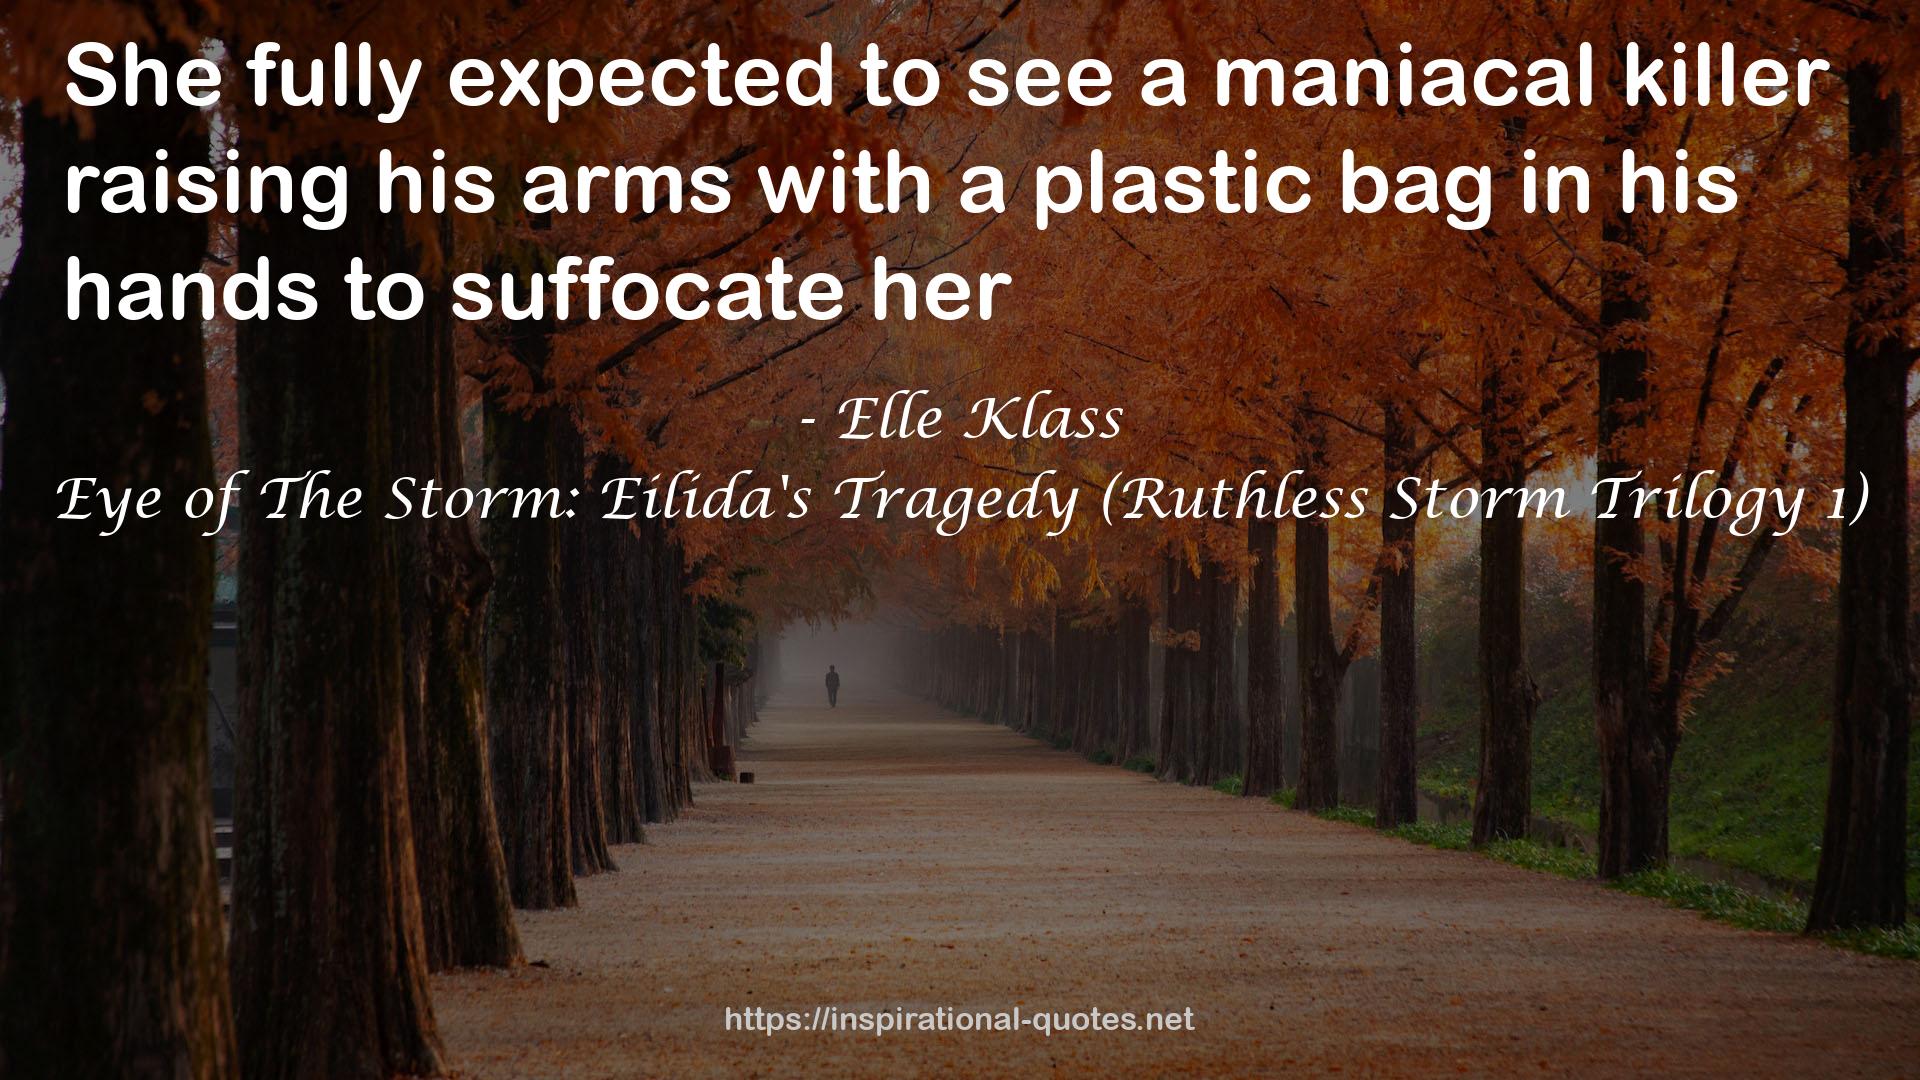 Eye of The Storm: Eilida's Tragedy (Ruthless Storm Trilogy 1) QUOTES